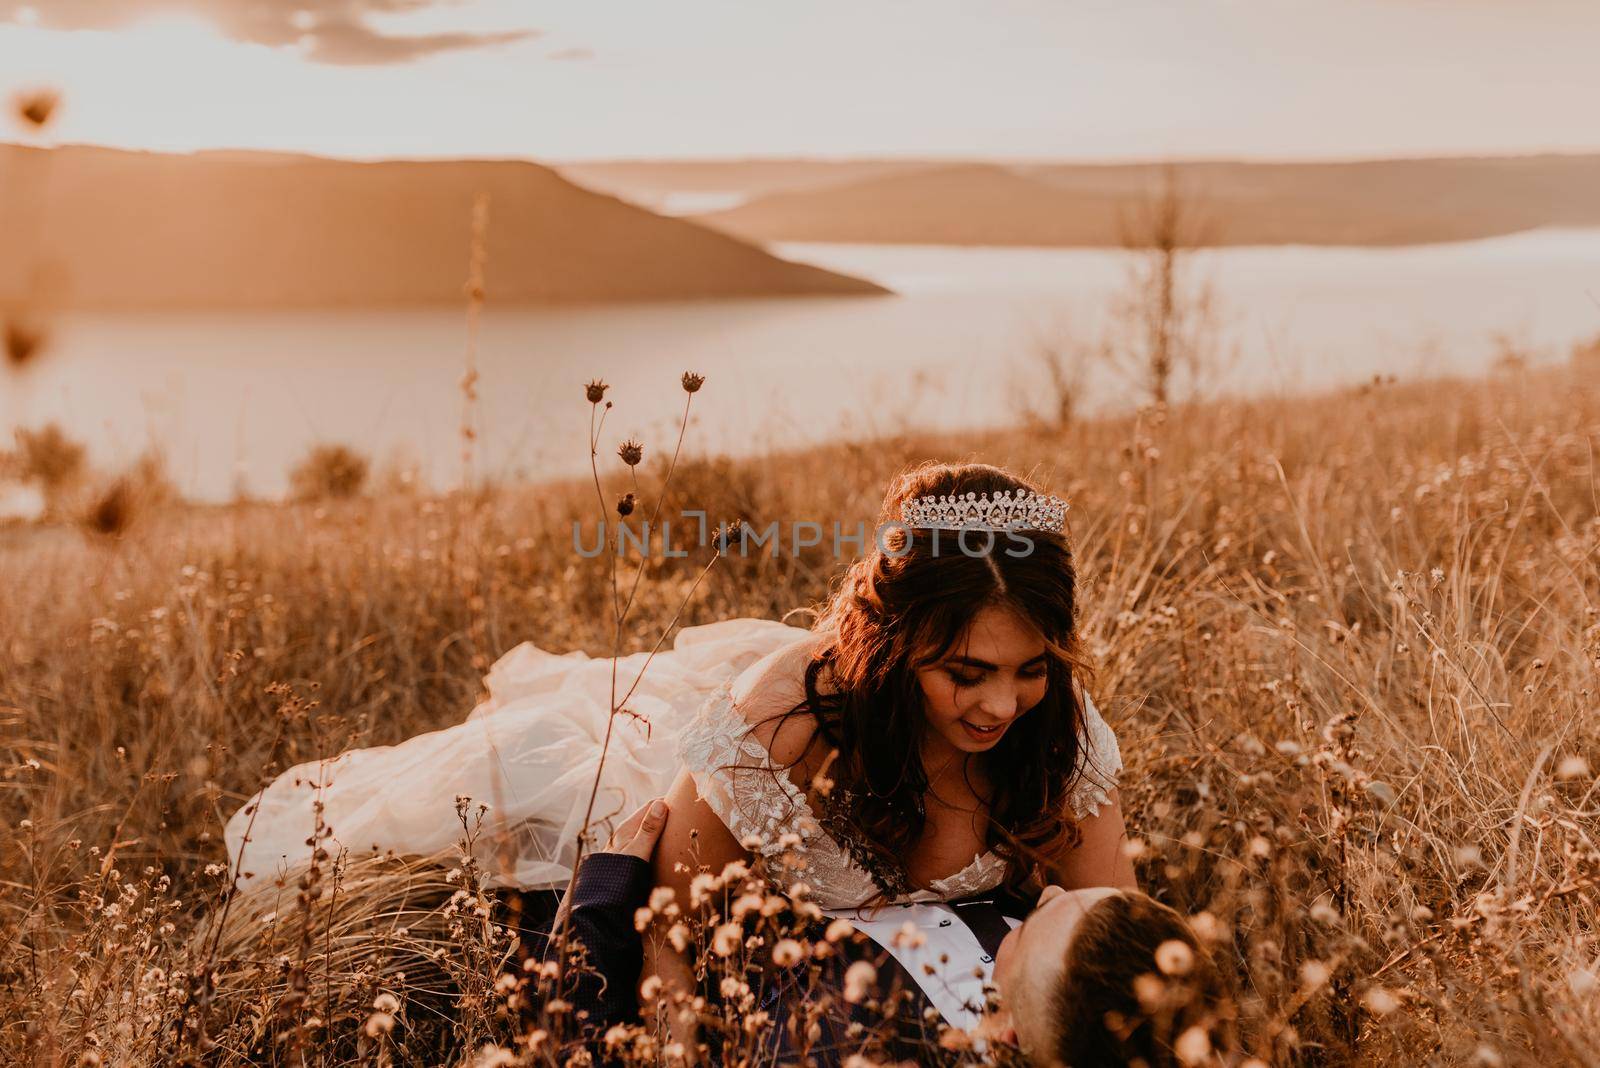 couple in love wedding newlyweds in a white dress and suit are walking lying long grass field in summer. man and woman kissing. bride and groom have fallen Meadow